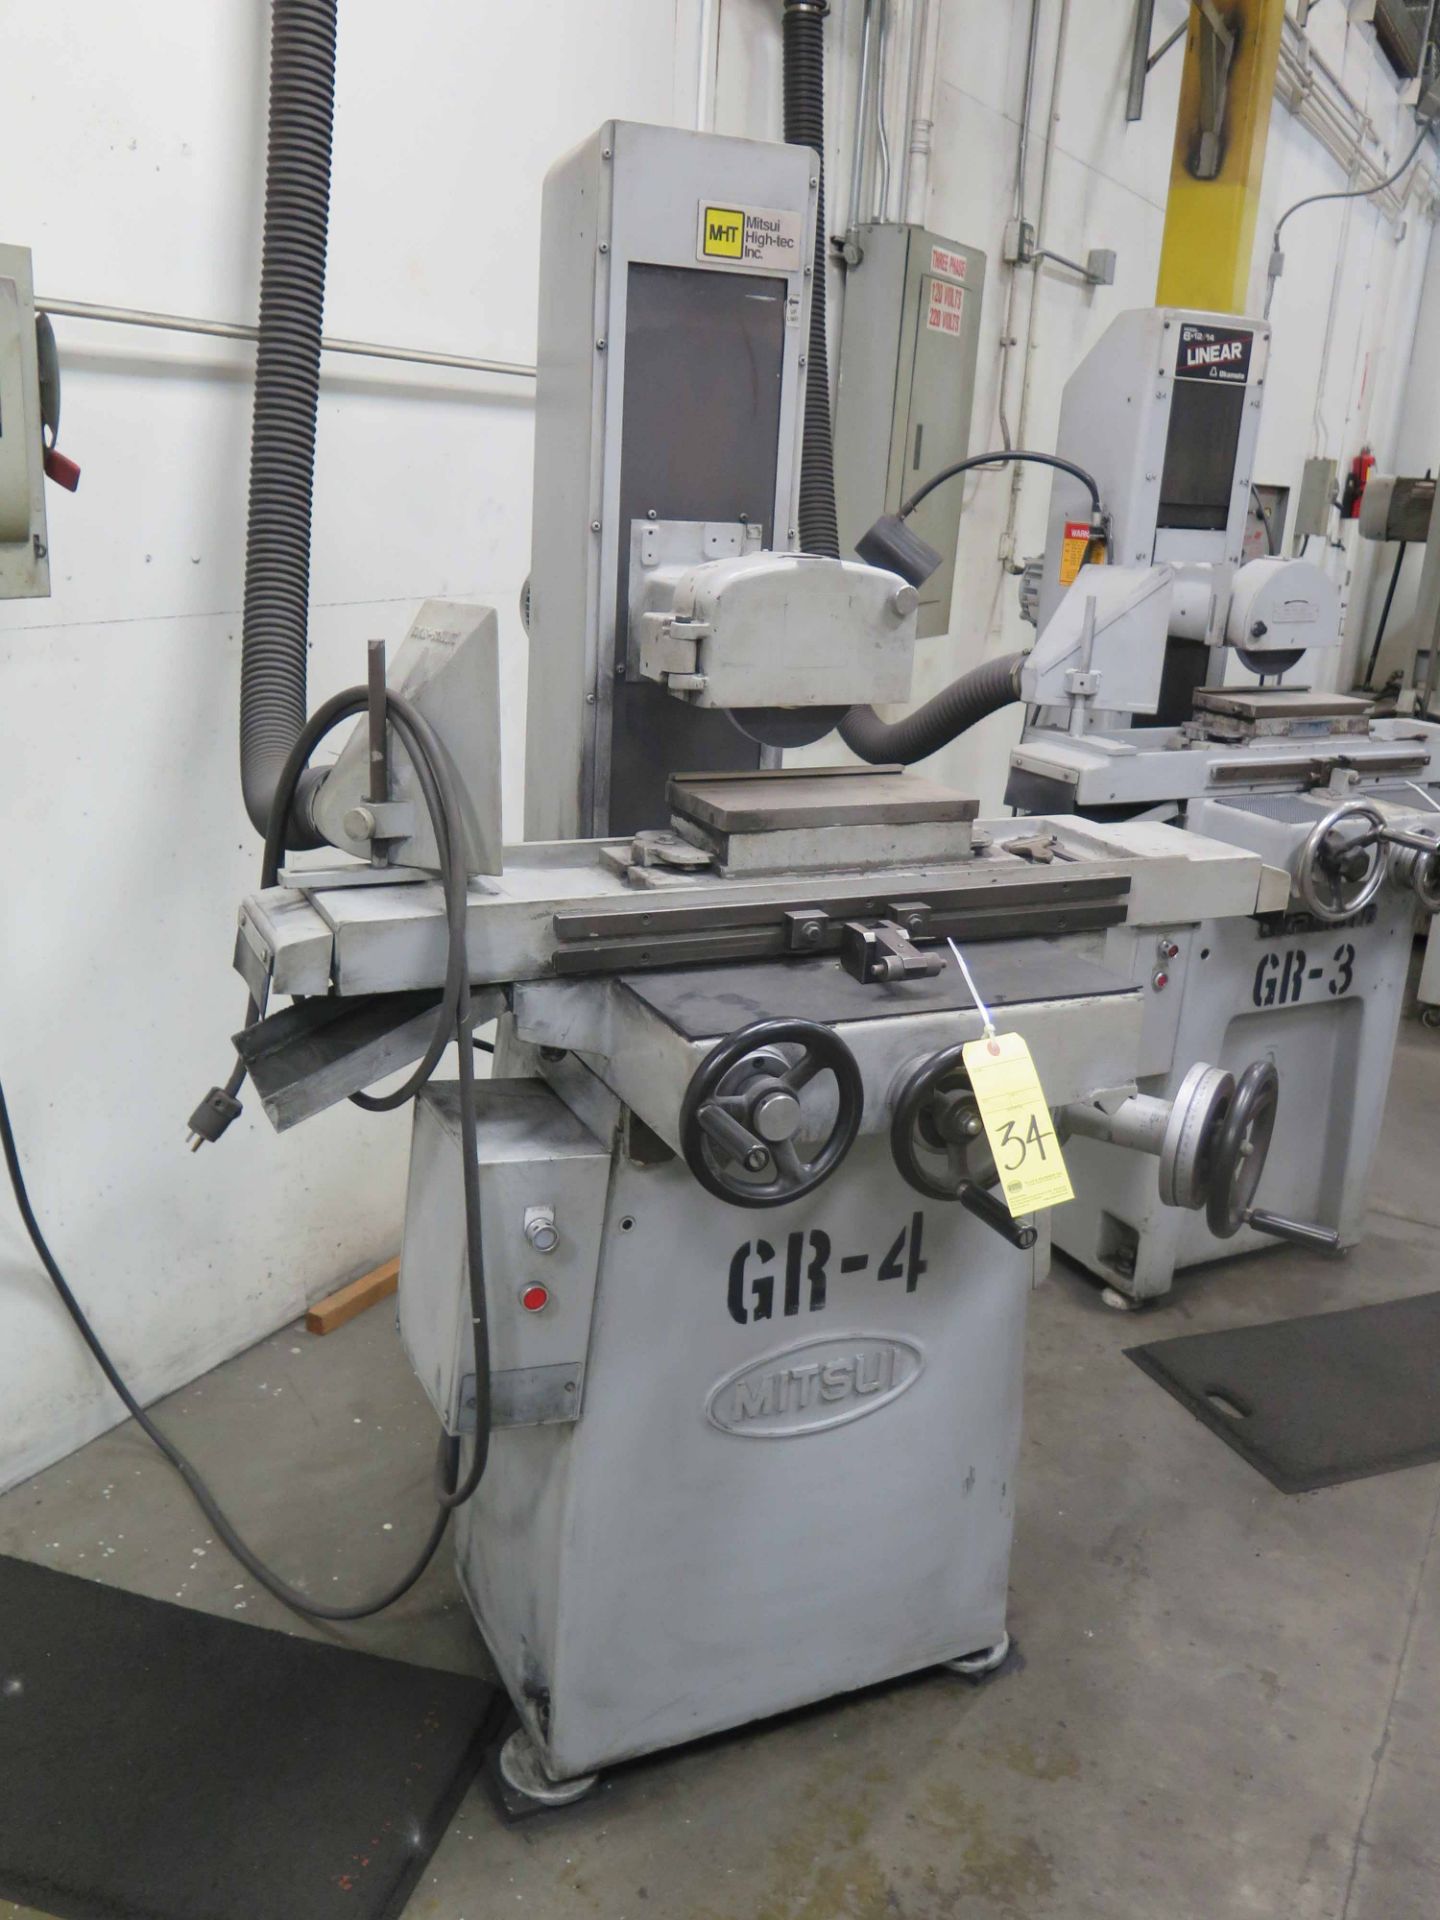 SURFACE GRINDER, MITSUI HIGH-TEC MDL. MSG-200MH, 6” x 12” electromagnetic chuck, Walker control, S/N